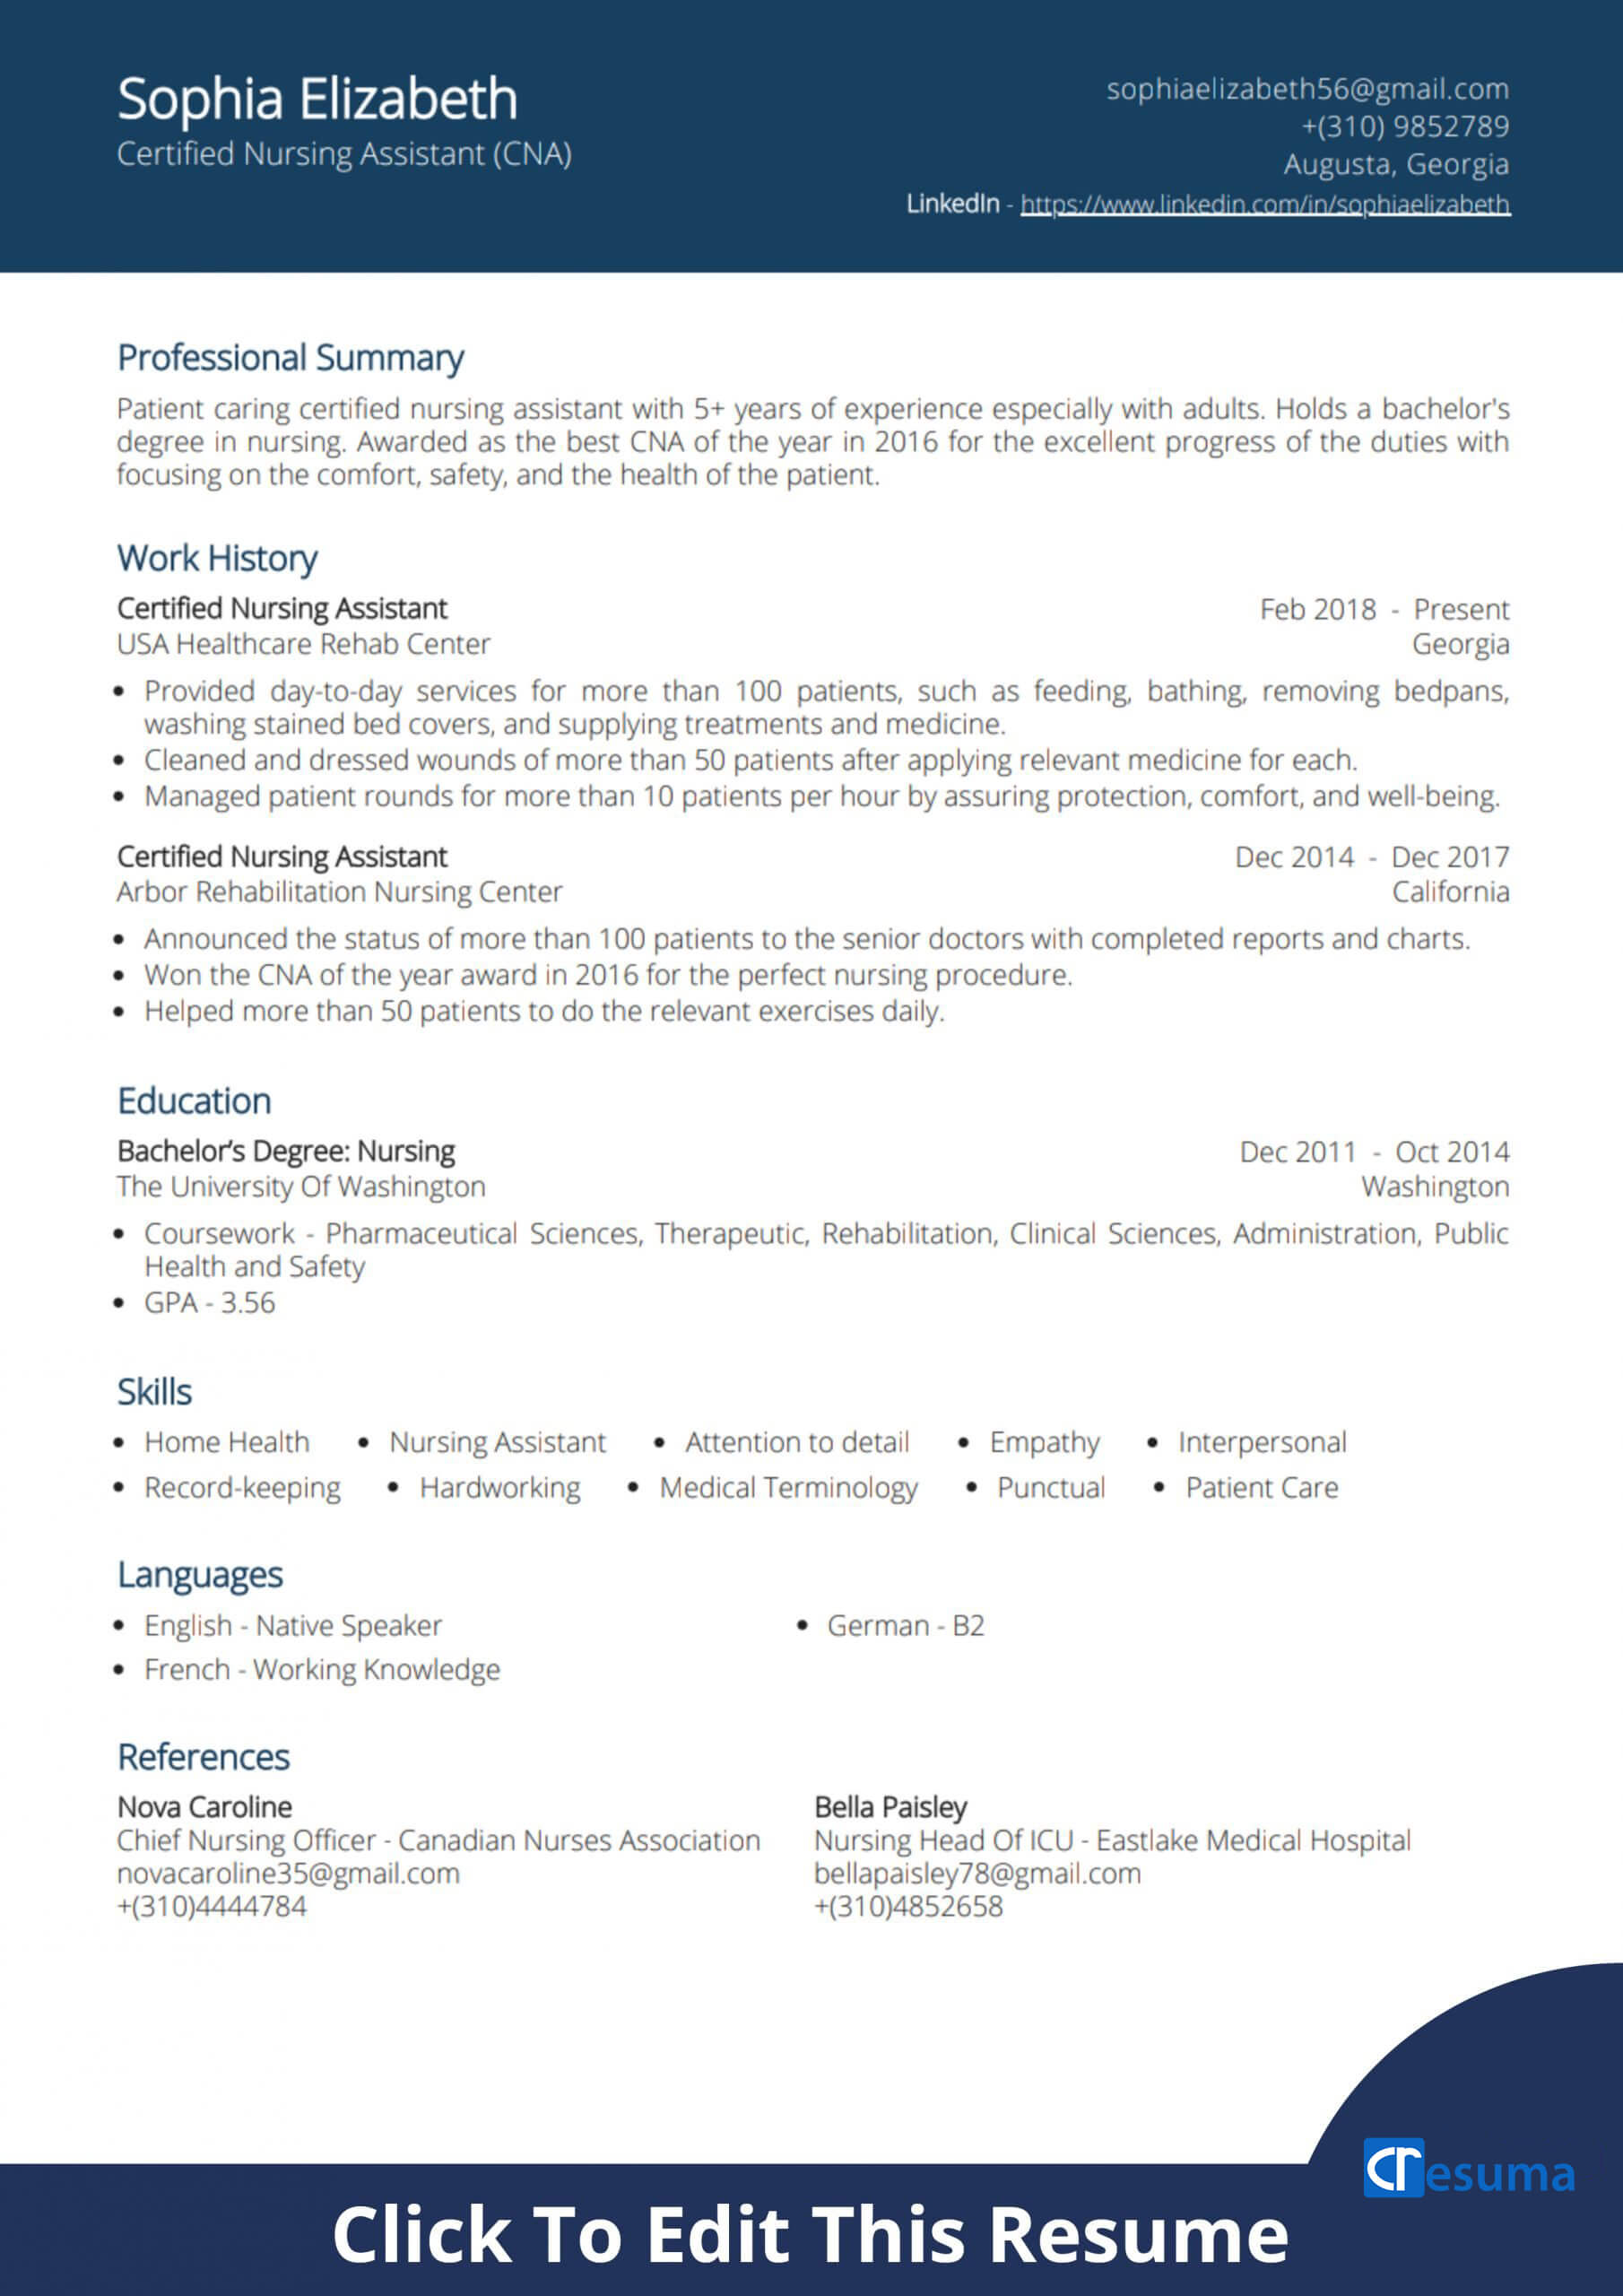 Certified Nursing Assistant (CNA) Resume Example